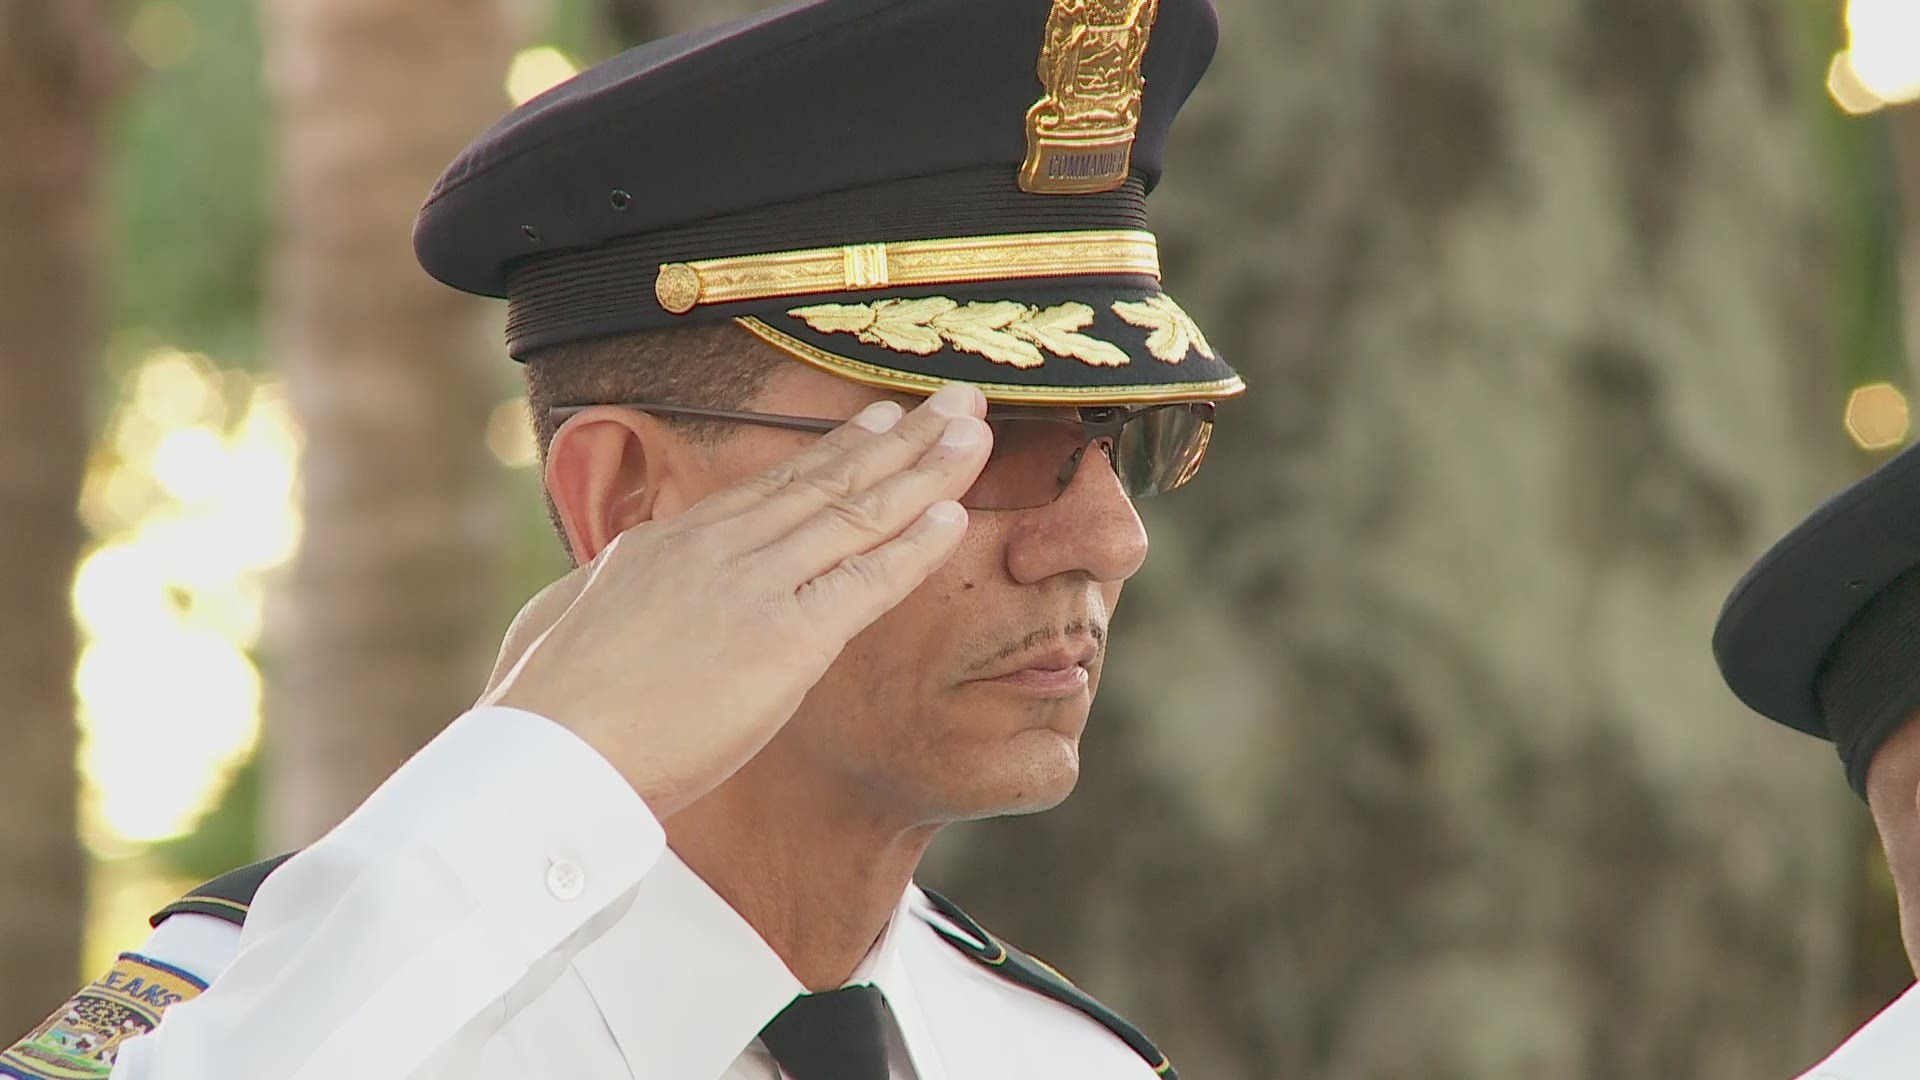 A ceremony was held honoring those across the state who lost their lives in the line of duty.